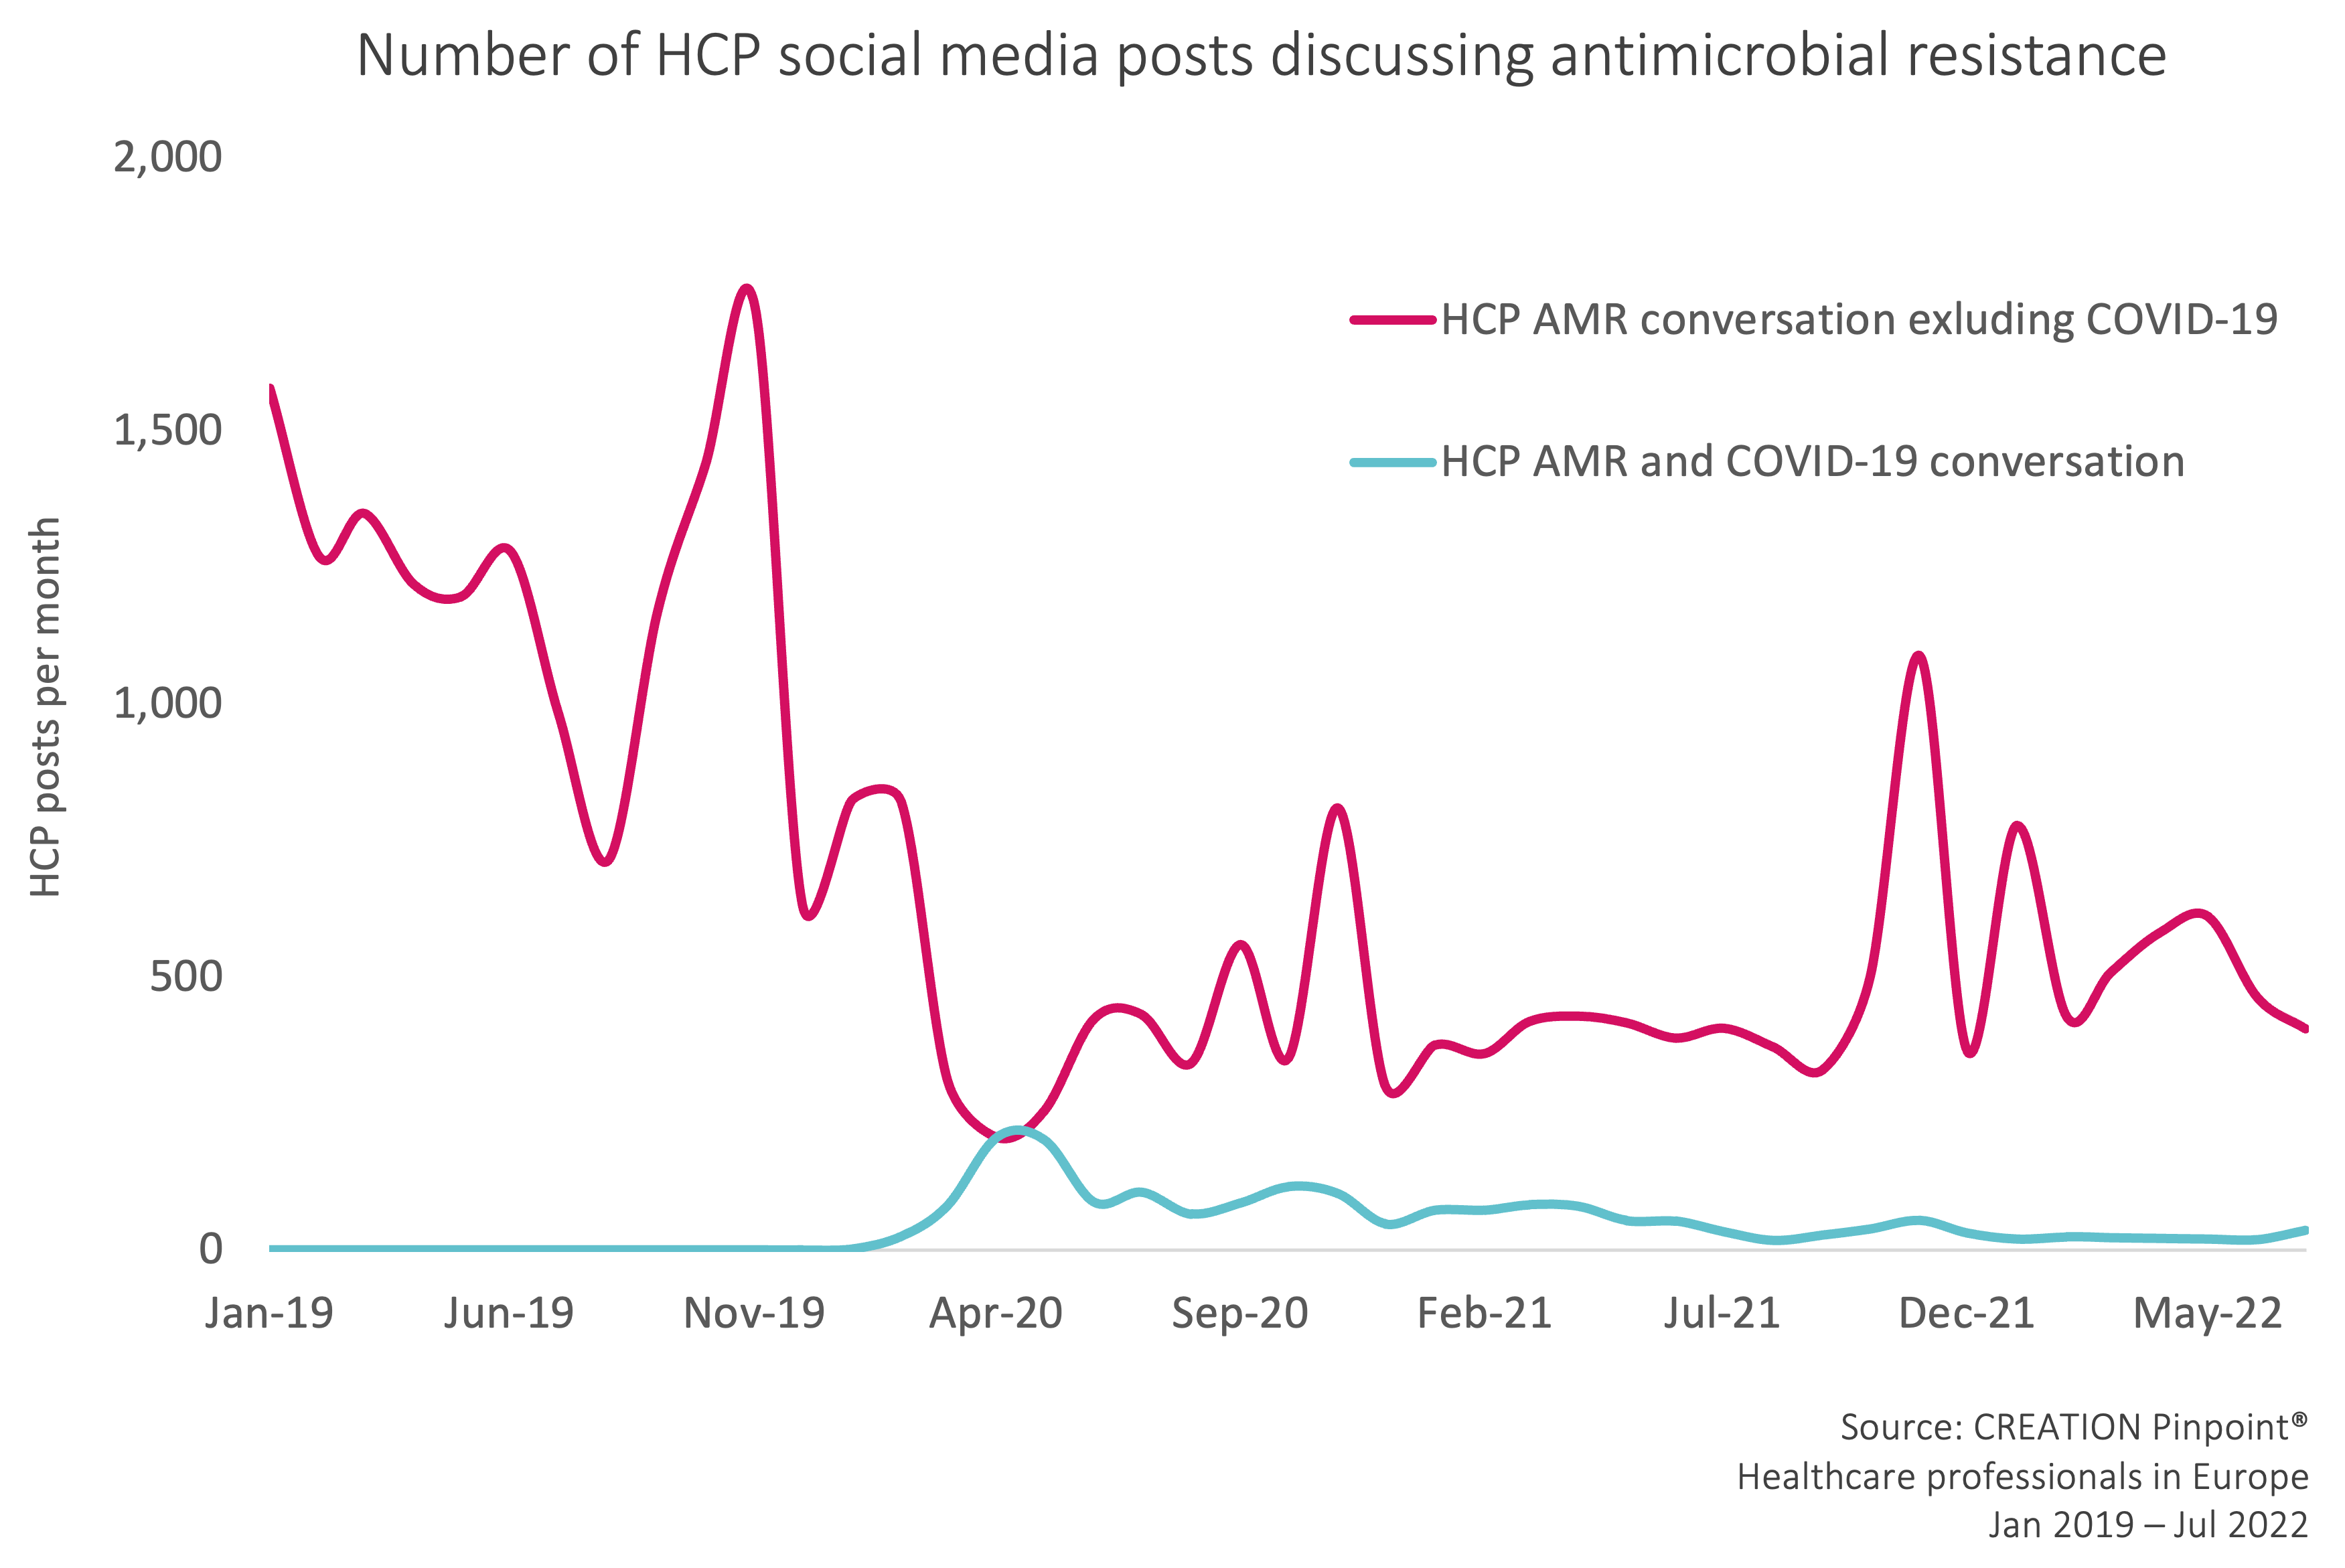 Graph showing the number of HCP social media posts discussing antimicrobial resistance